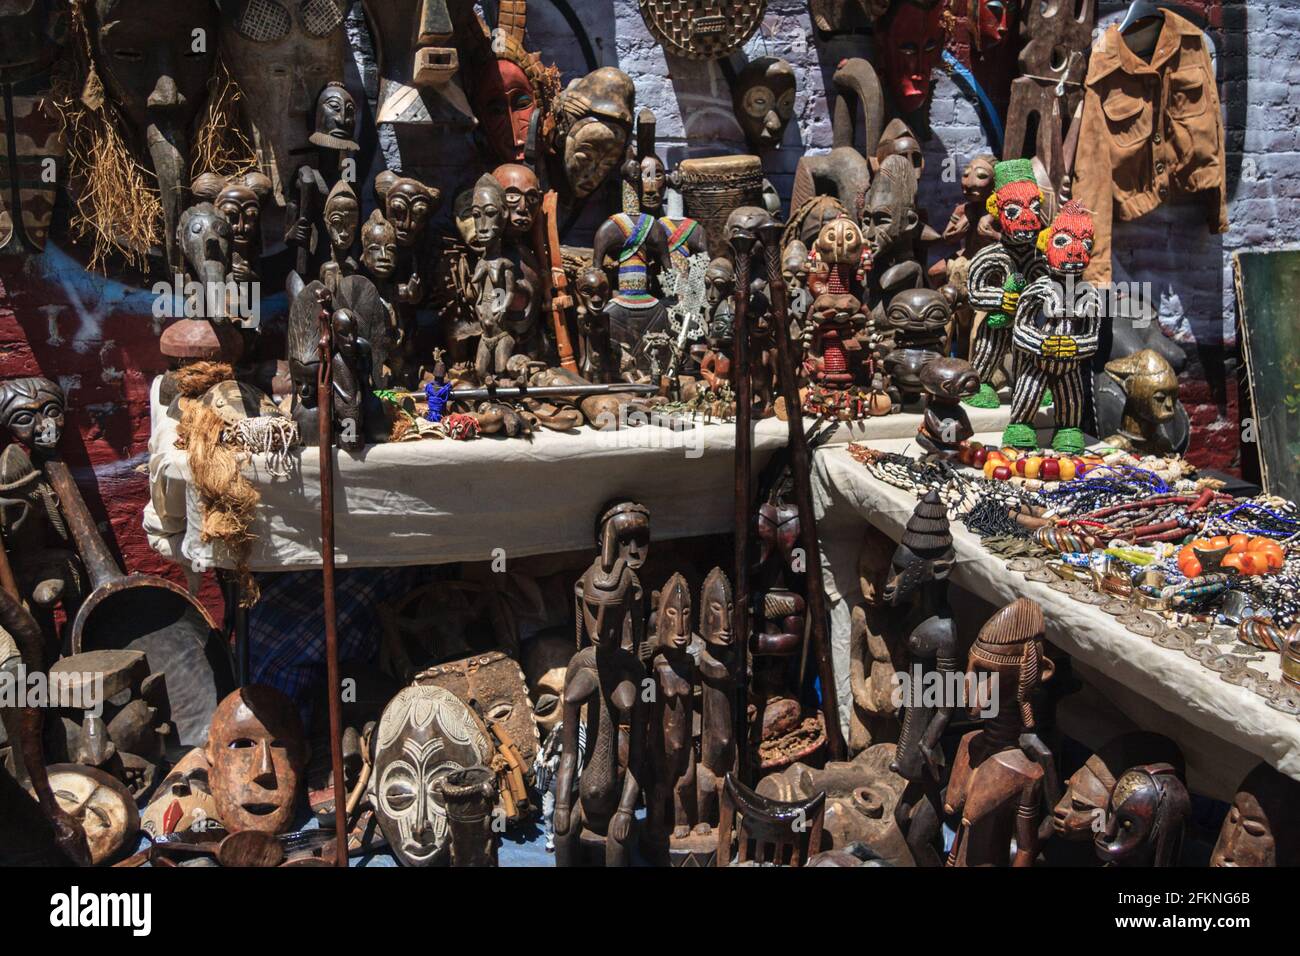 African artefacts, wooden carvings and souveniers at a flea market stall, New York City Stock Photo